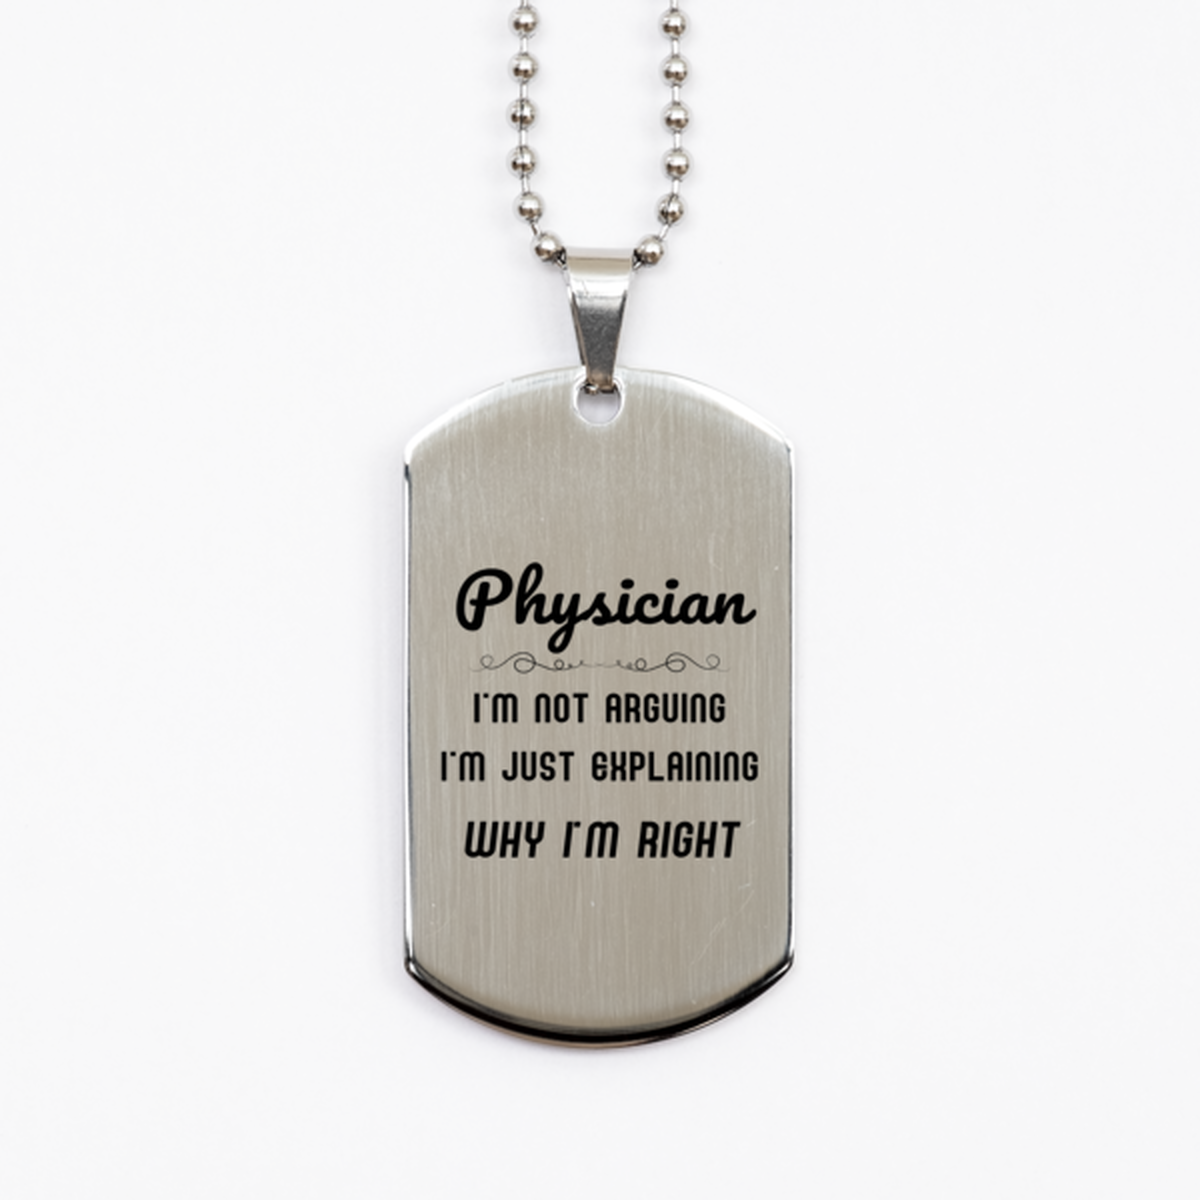 Physician I'm not Arguing. I'm Just Explaining Why I'm RIGHT Silver Dog Tag, Funny Saying Quote Physician Gifts For Physician Graduation Birthday Christmas Gifts for Men Women Coworker